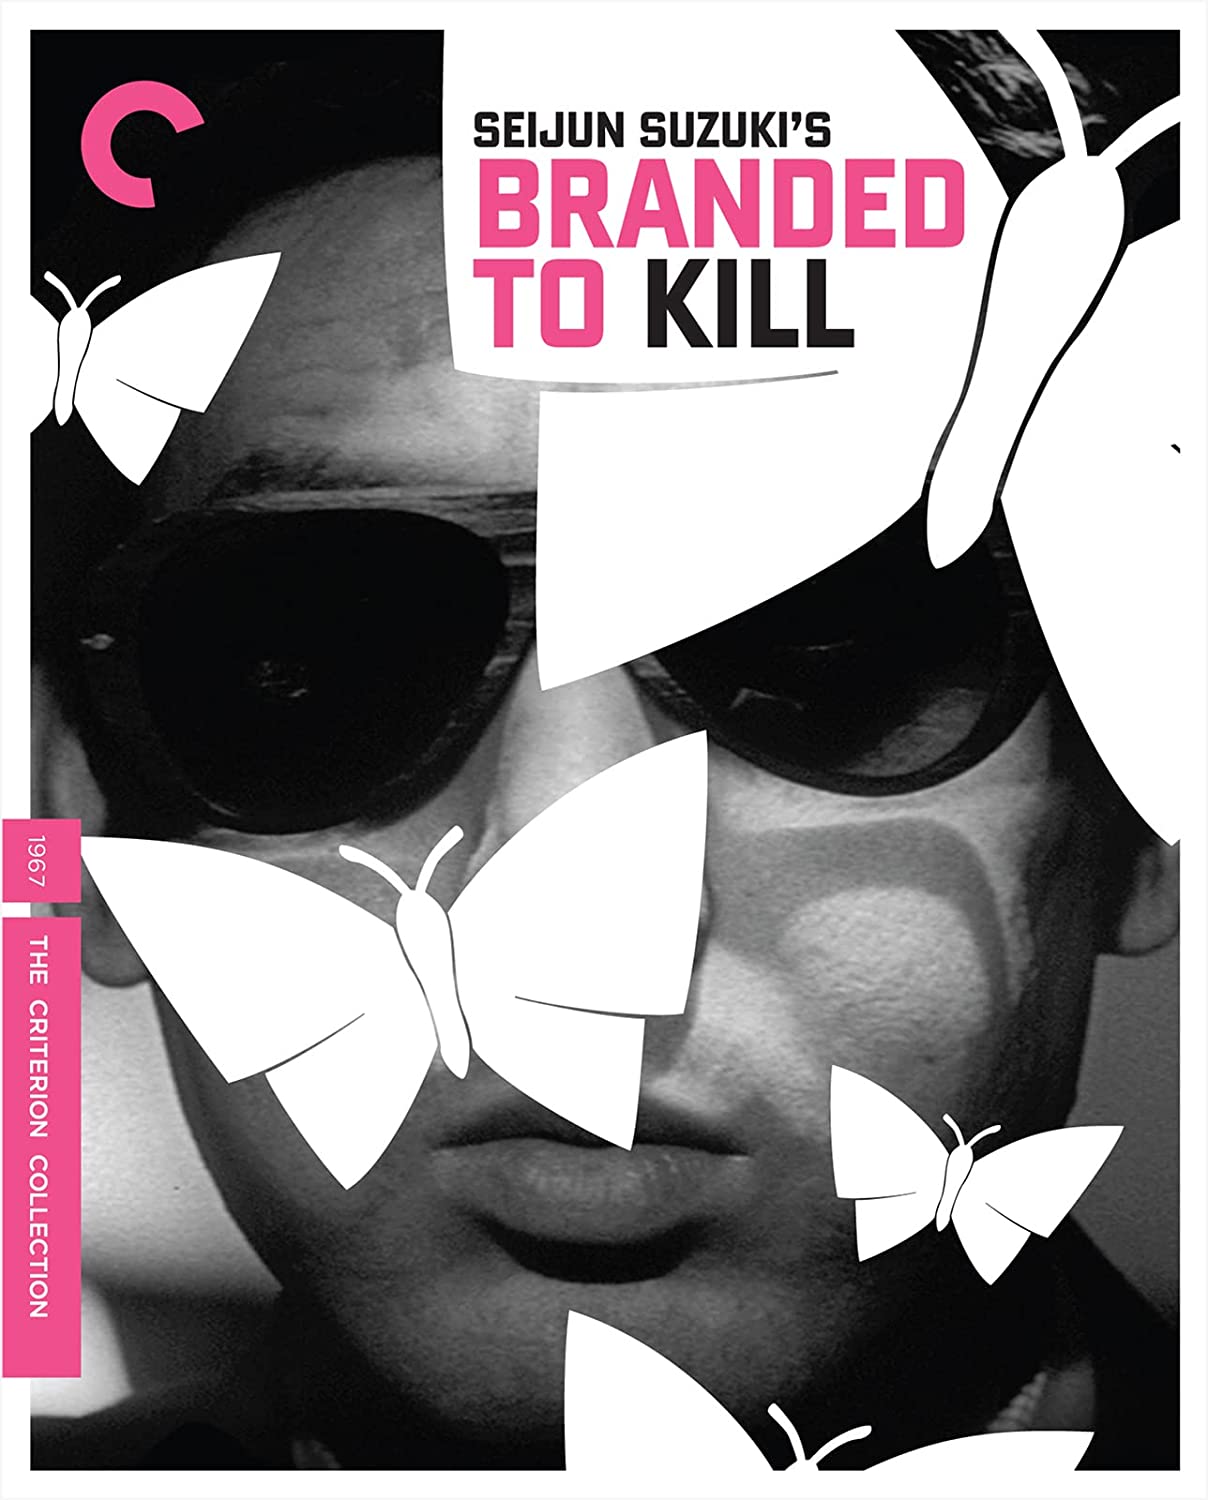 Branded to Kill (1967) 4k Blu-ray Criterion Collection